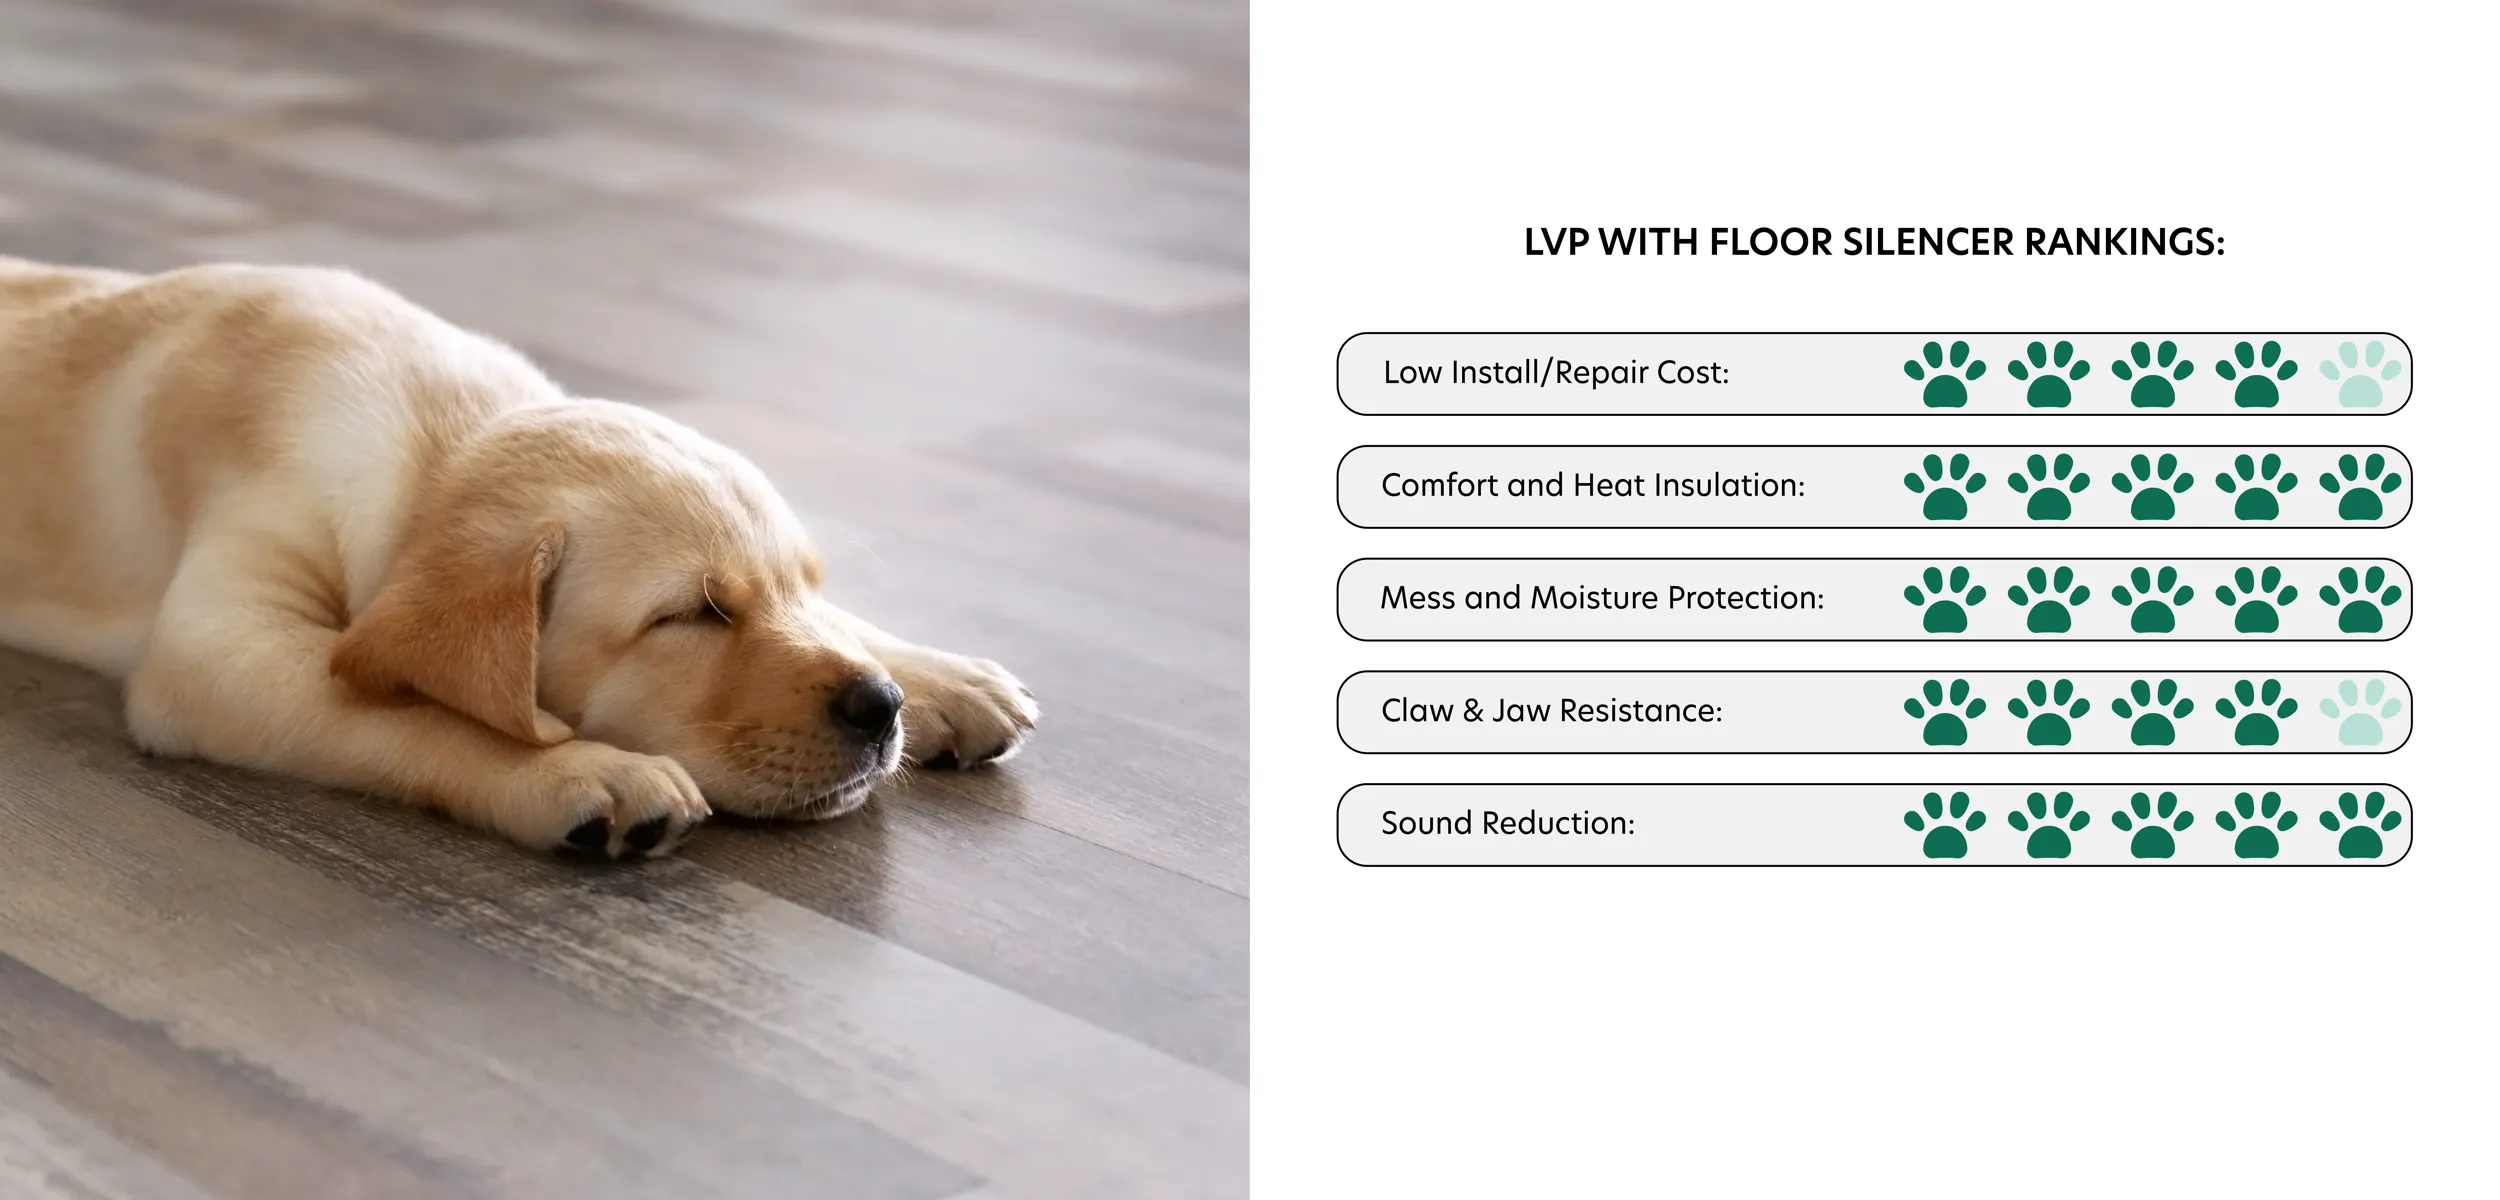 Sleeping dog resting on LVP flooring. LVP rankings in best flooring for pets. Low Install/Repair Cost: 4 Paws. Comfort and Heat Insulation: 5 Paws. Mess and Moisture Protection: 5 Paws. Claw & Jaw Resistance: 4 Paws. Sound Reduction: 5 Paws.